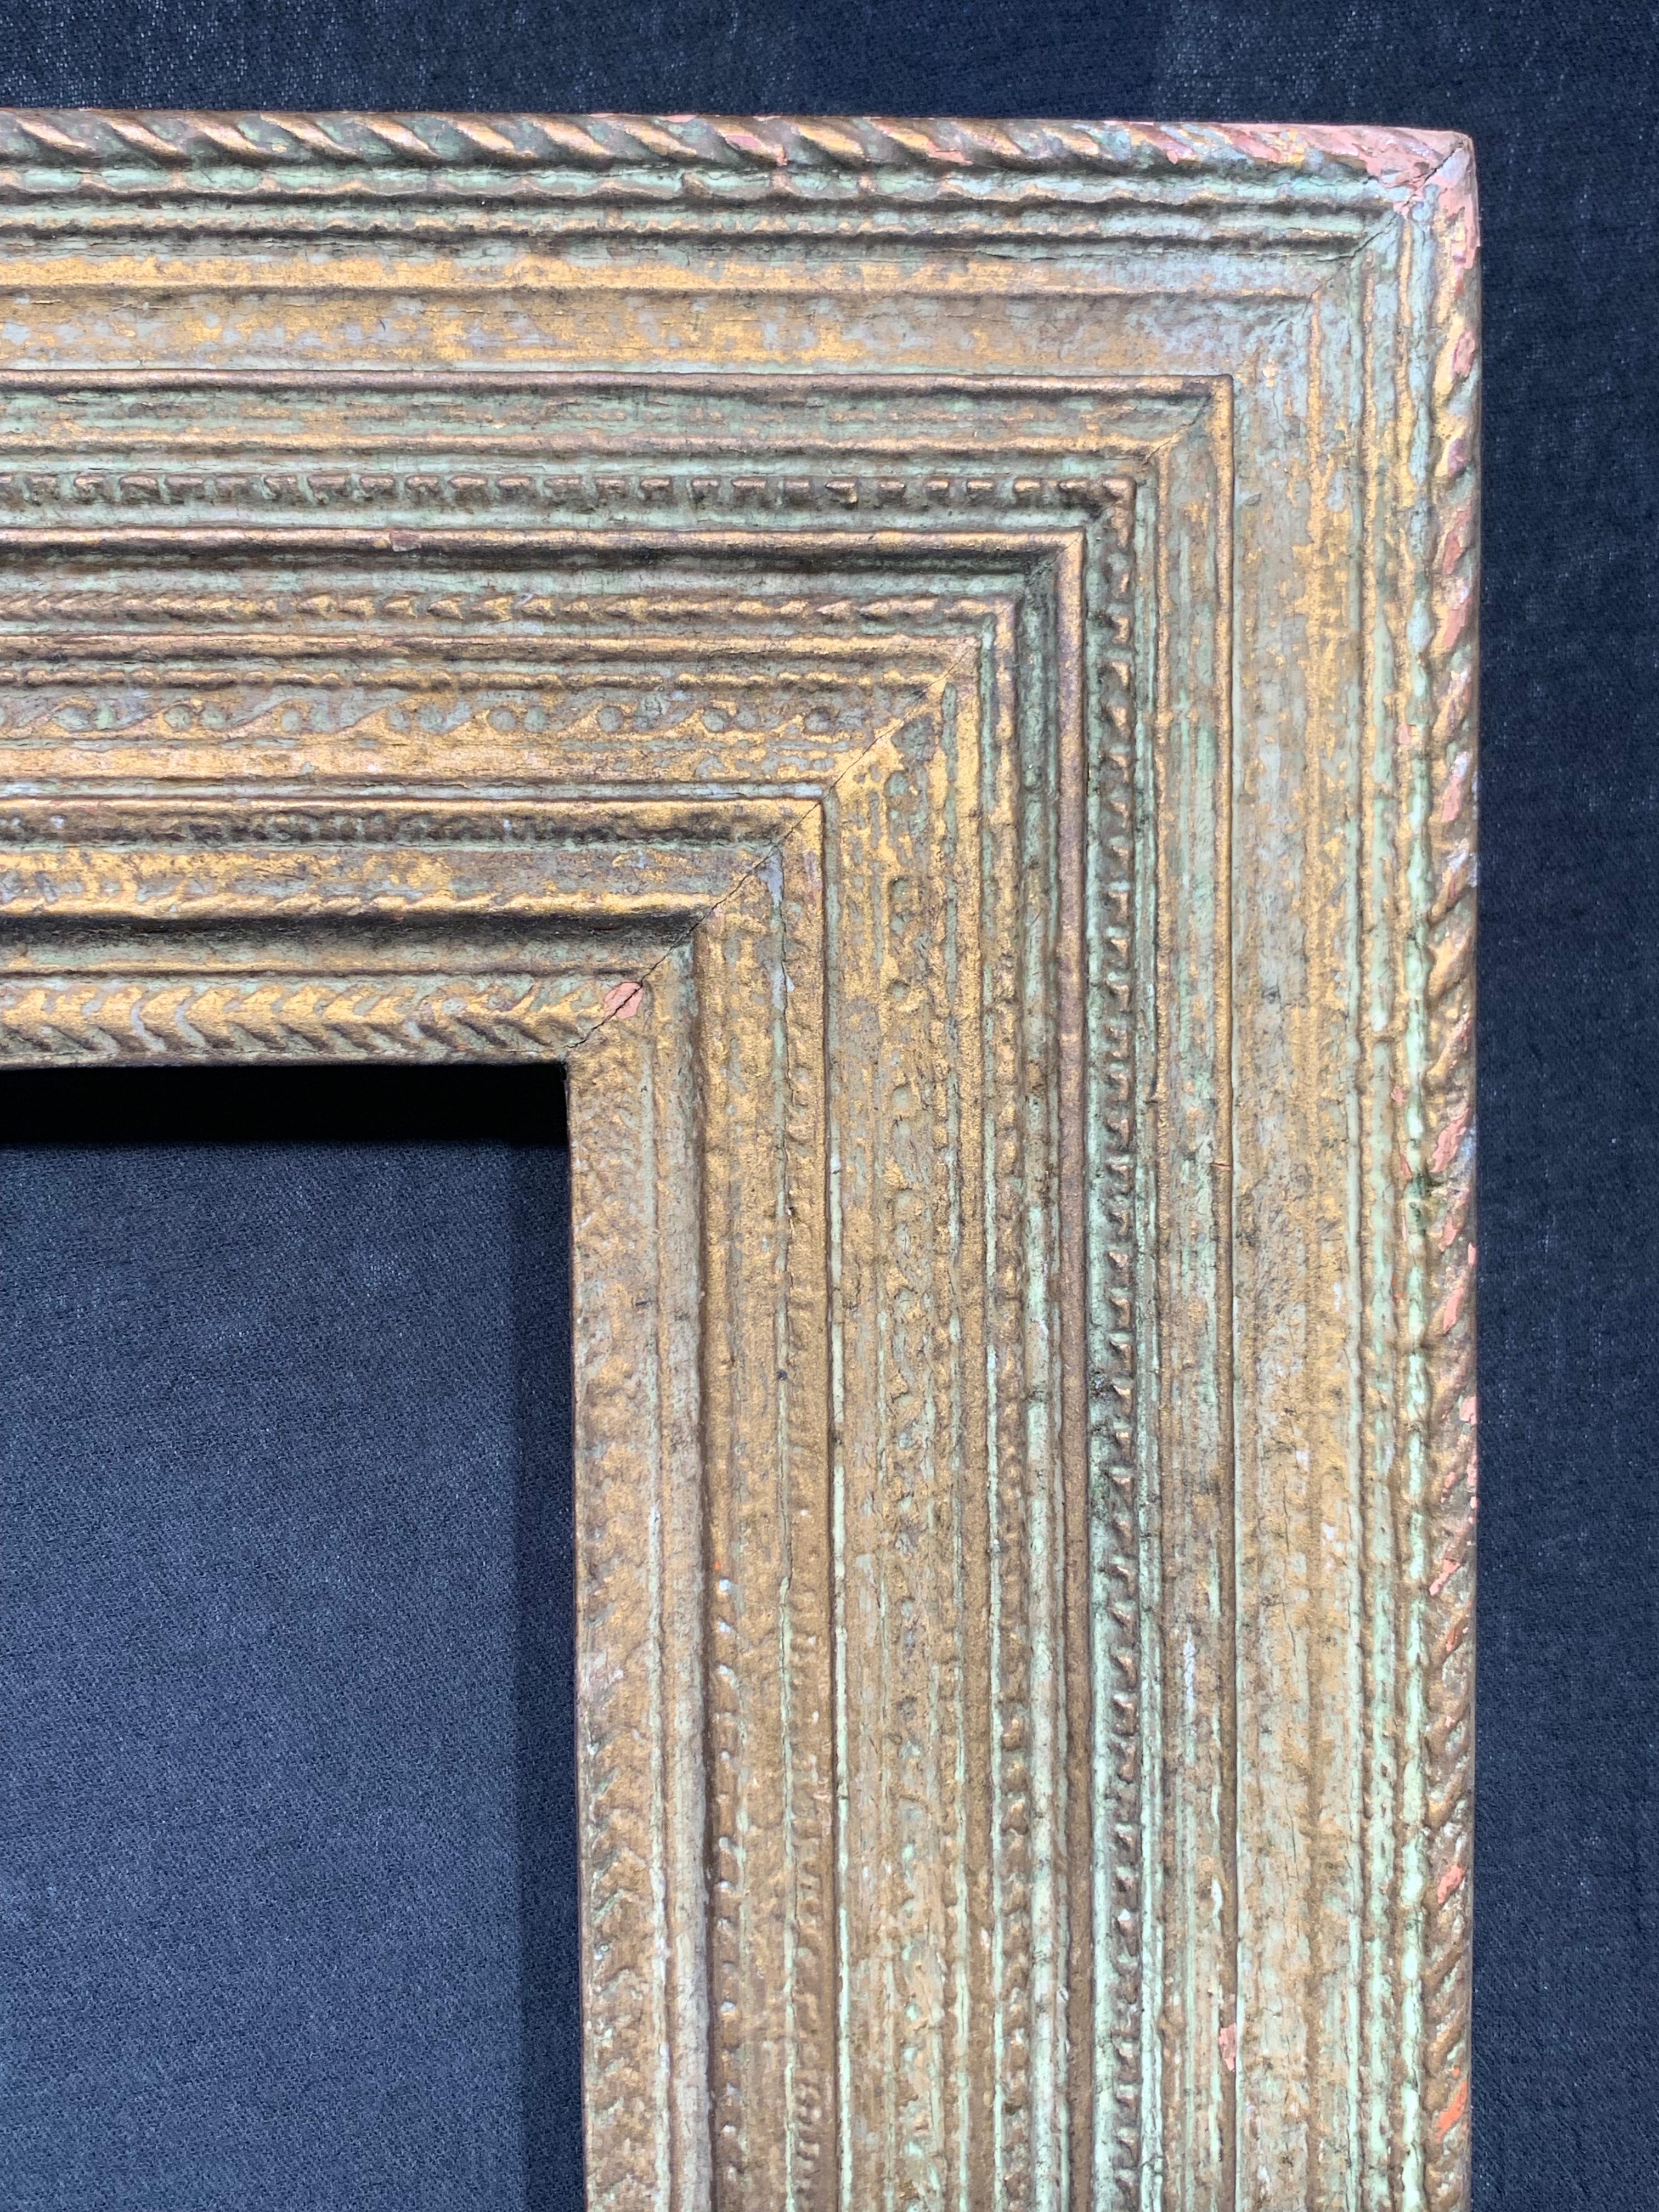 PERIOD FRAMES c. 1915 American painting frame pair, (earlier Stanford White design), Newcomb-Macklin, New York makers, gold leaf, gray bole, gesso, on cast ornament on wood. Flat panel profile with alternating rows of applied ornament. These